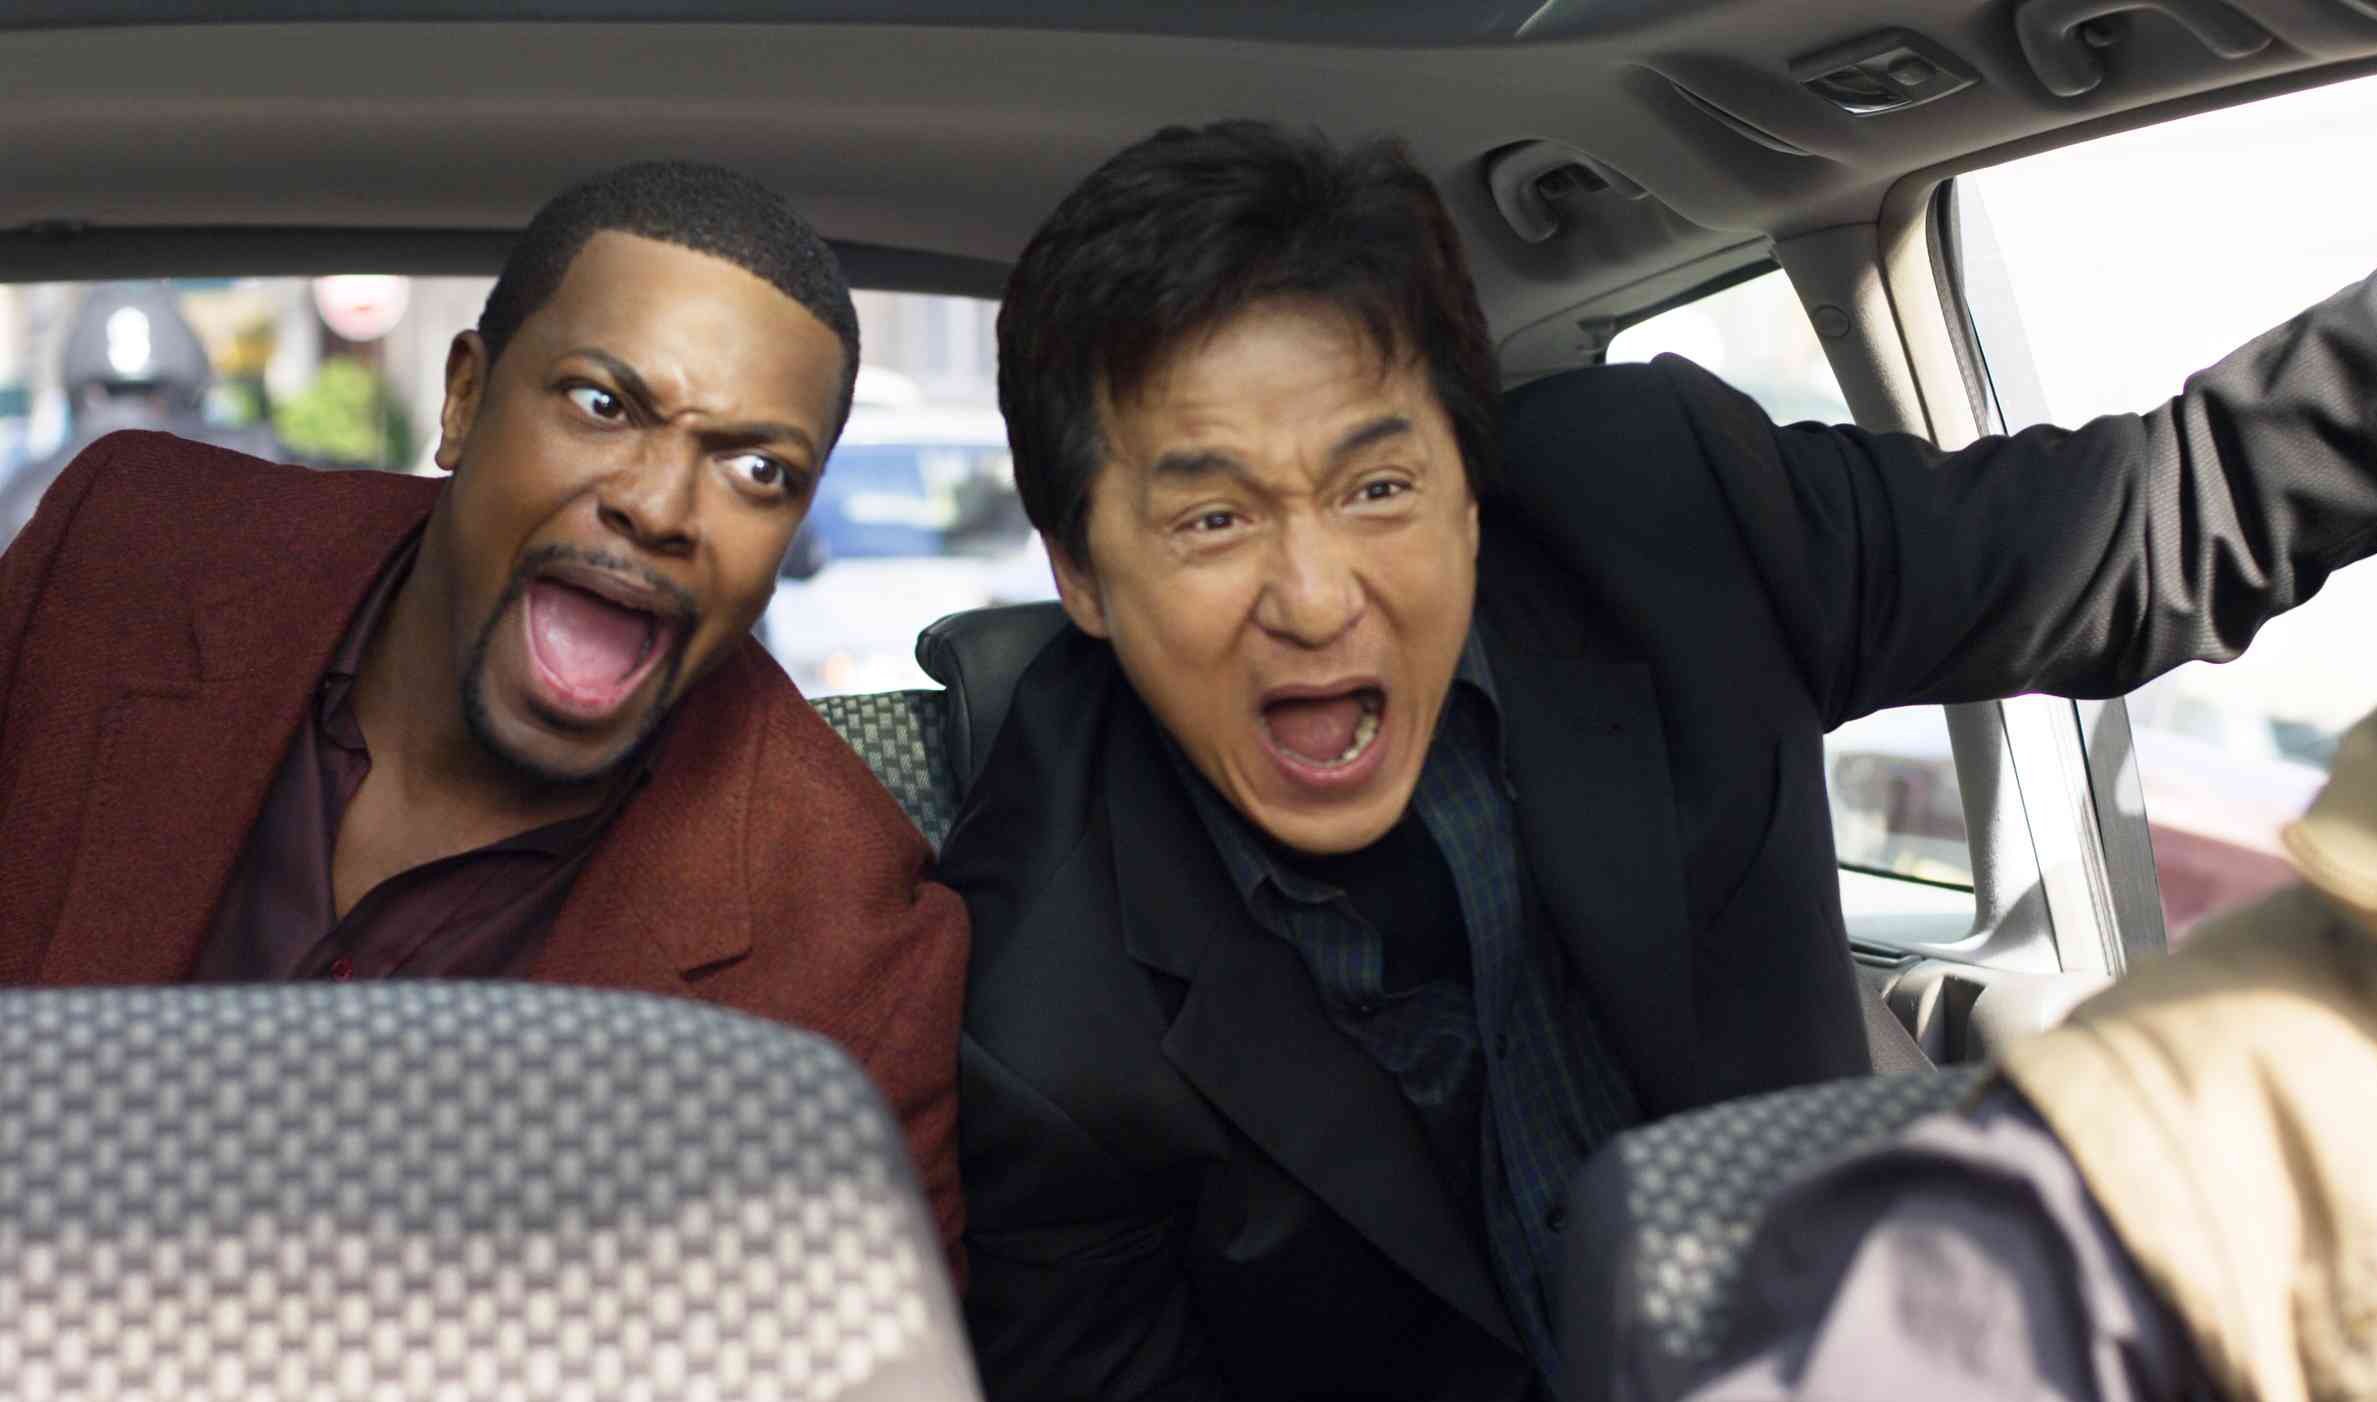 Rush Hour wallpapers, Movie, HQ Rush Hour pictures 4K Wallpapers 2019